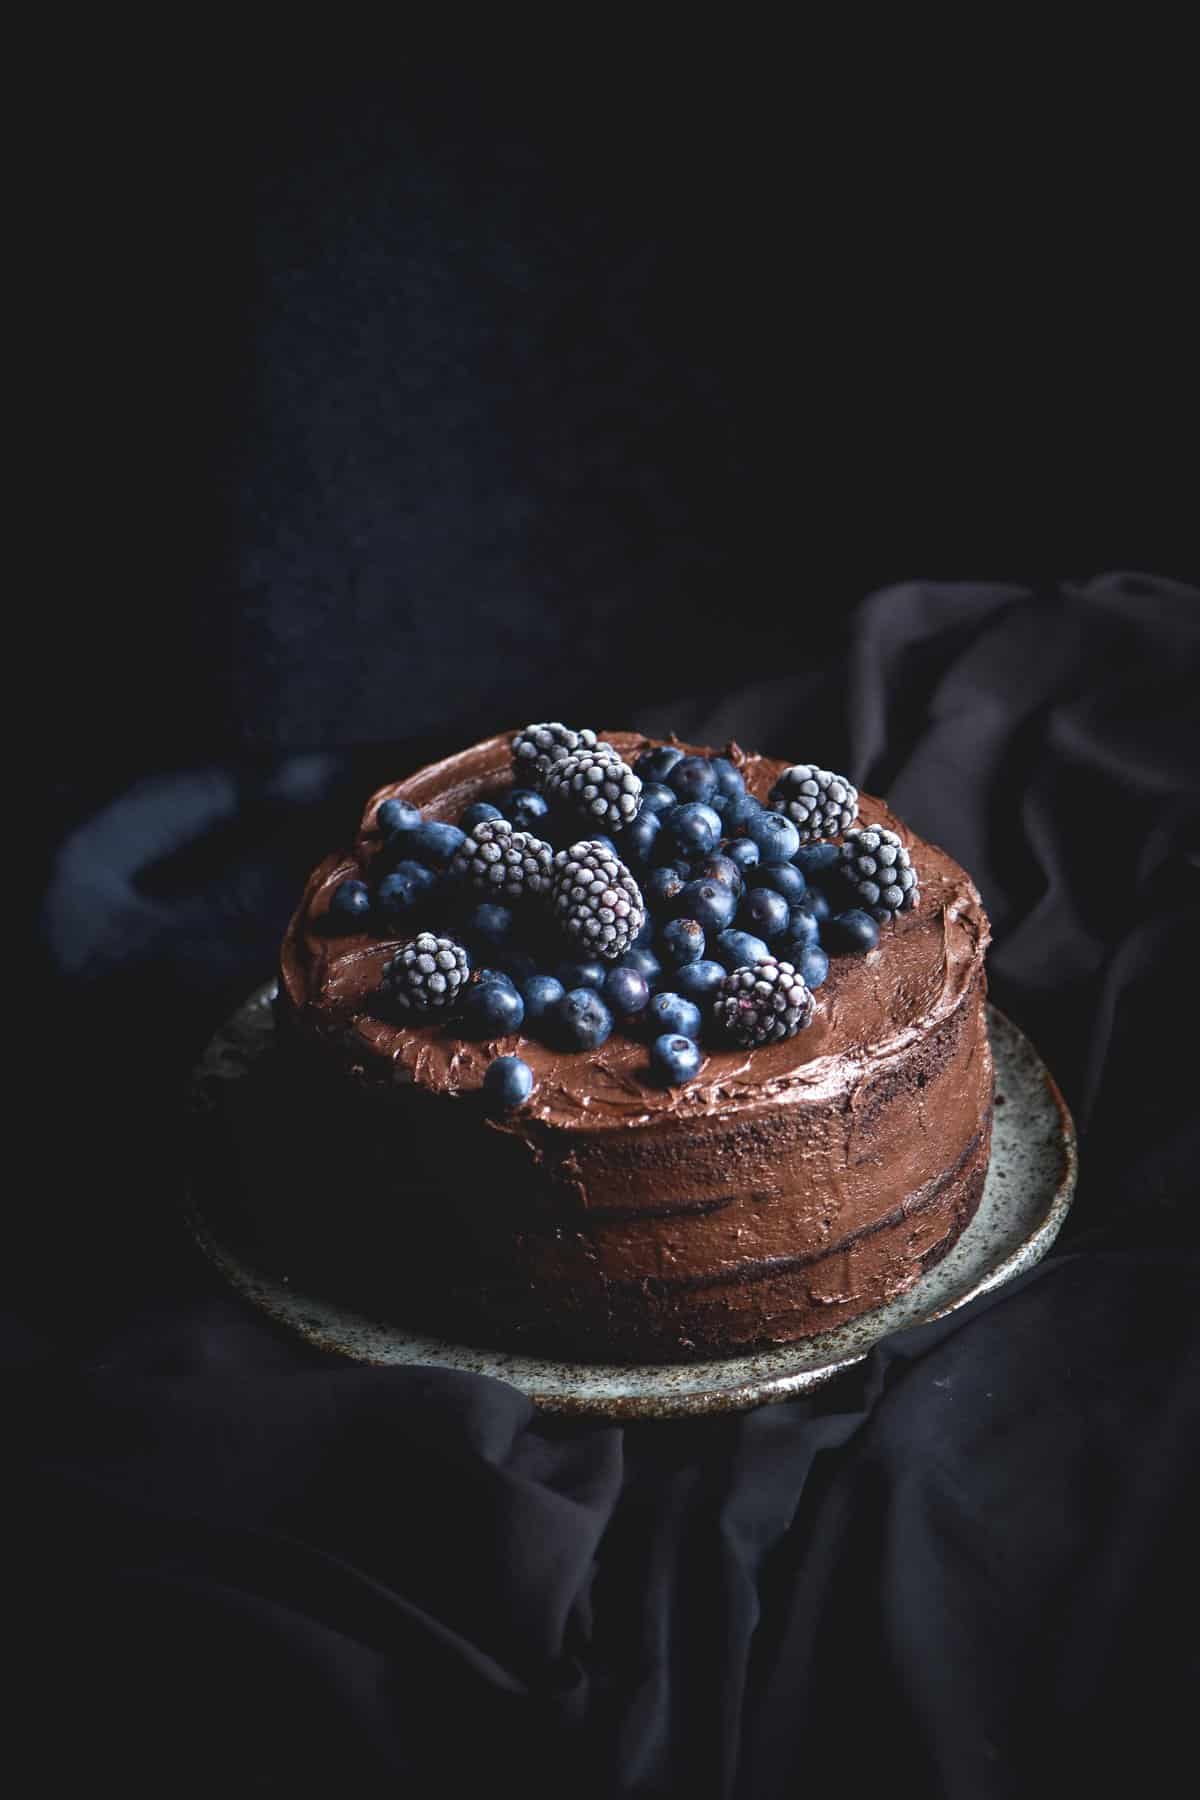 A gluten free chocolate layer cake topped with blueberries and blackberries, set against a black backdrop